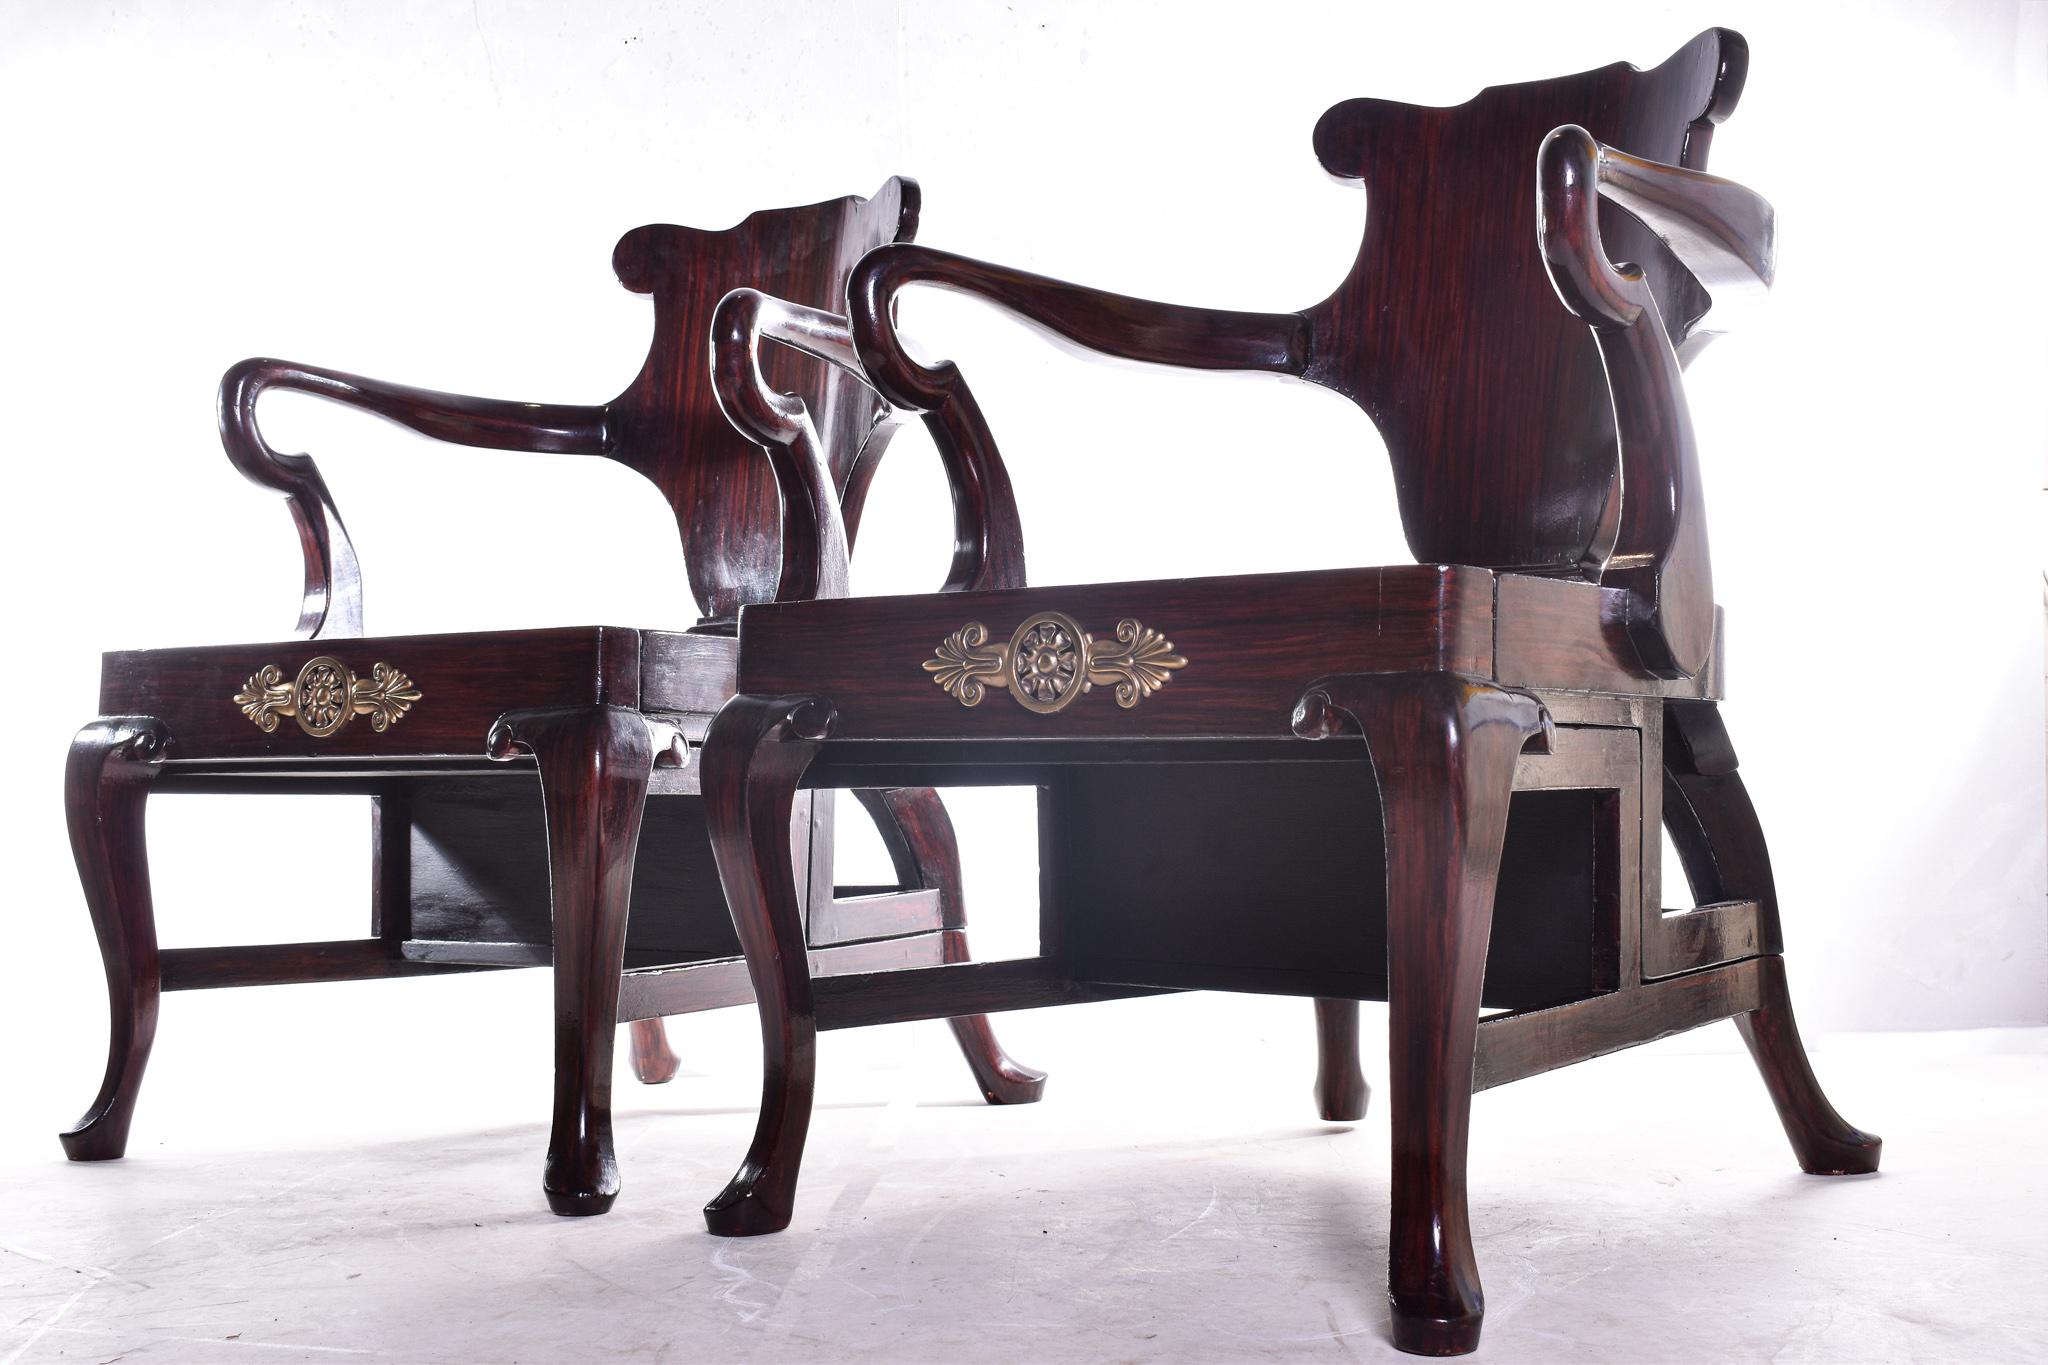 A highly elegant and unusual pair of simulated rosewood metamorphic armchairs, in George II style transforming into library steps with shaped solid backs above hinged seats resting on cabriole legs, with inset leather treads and Etruscan design